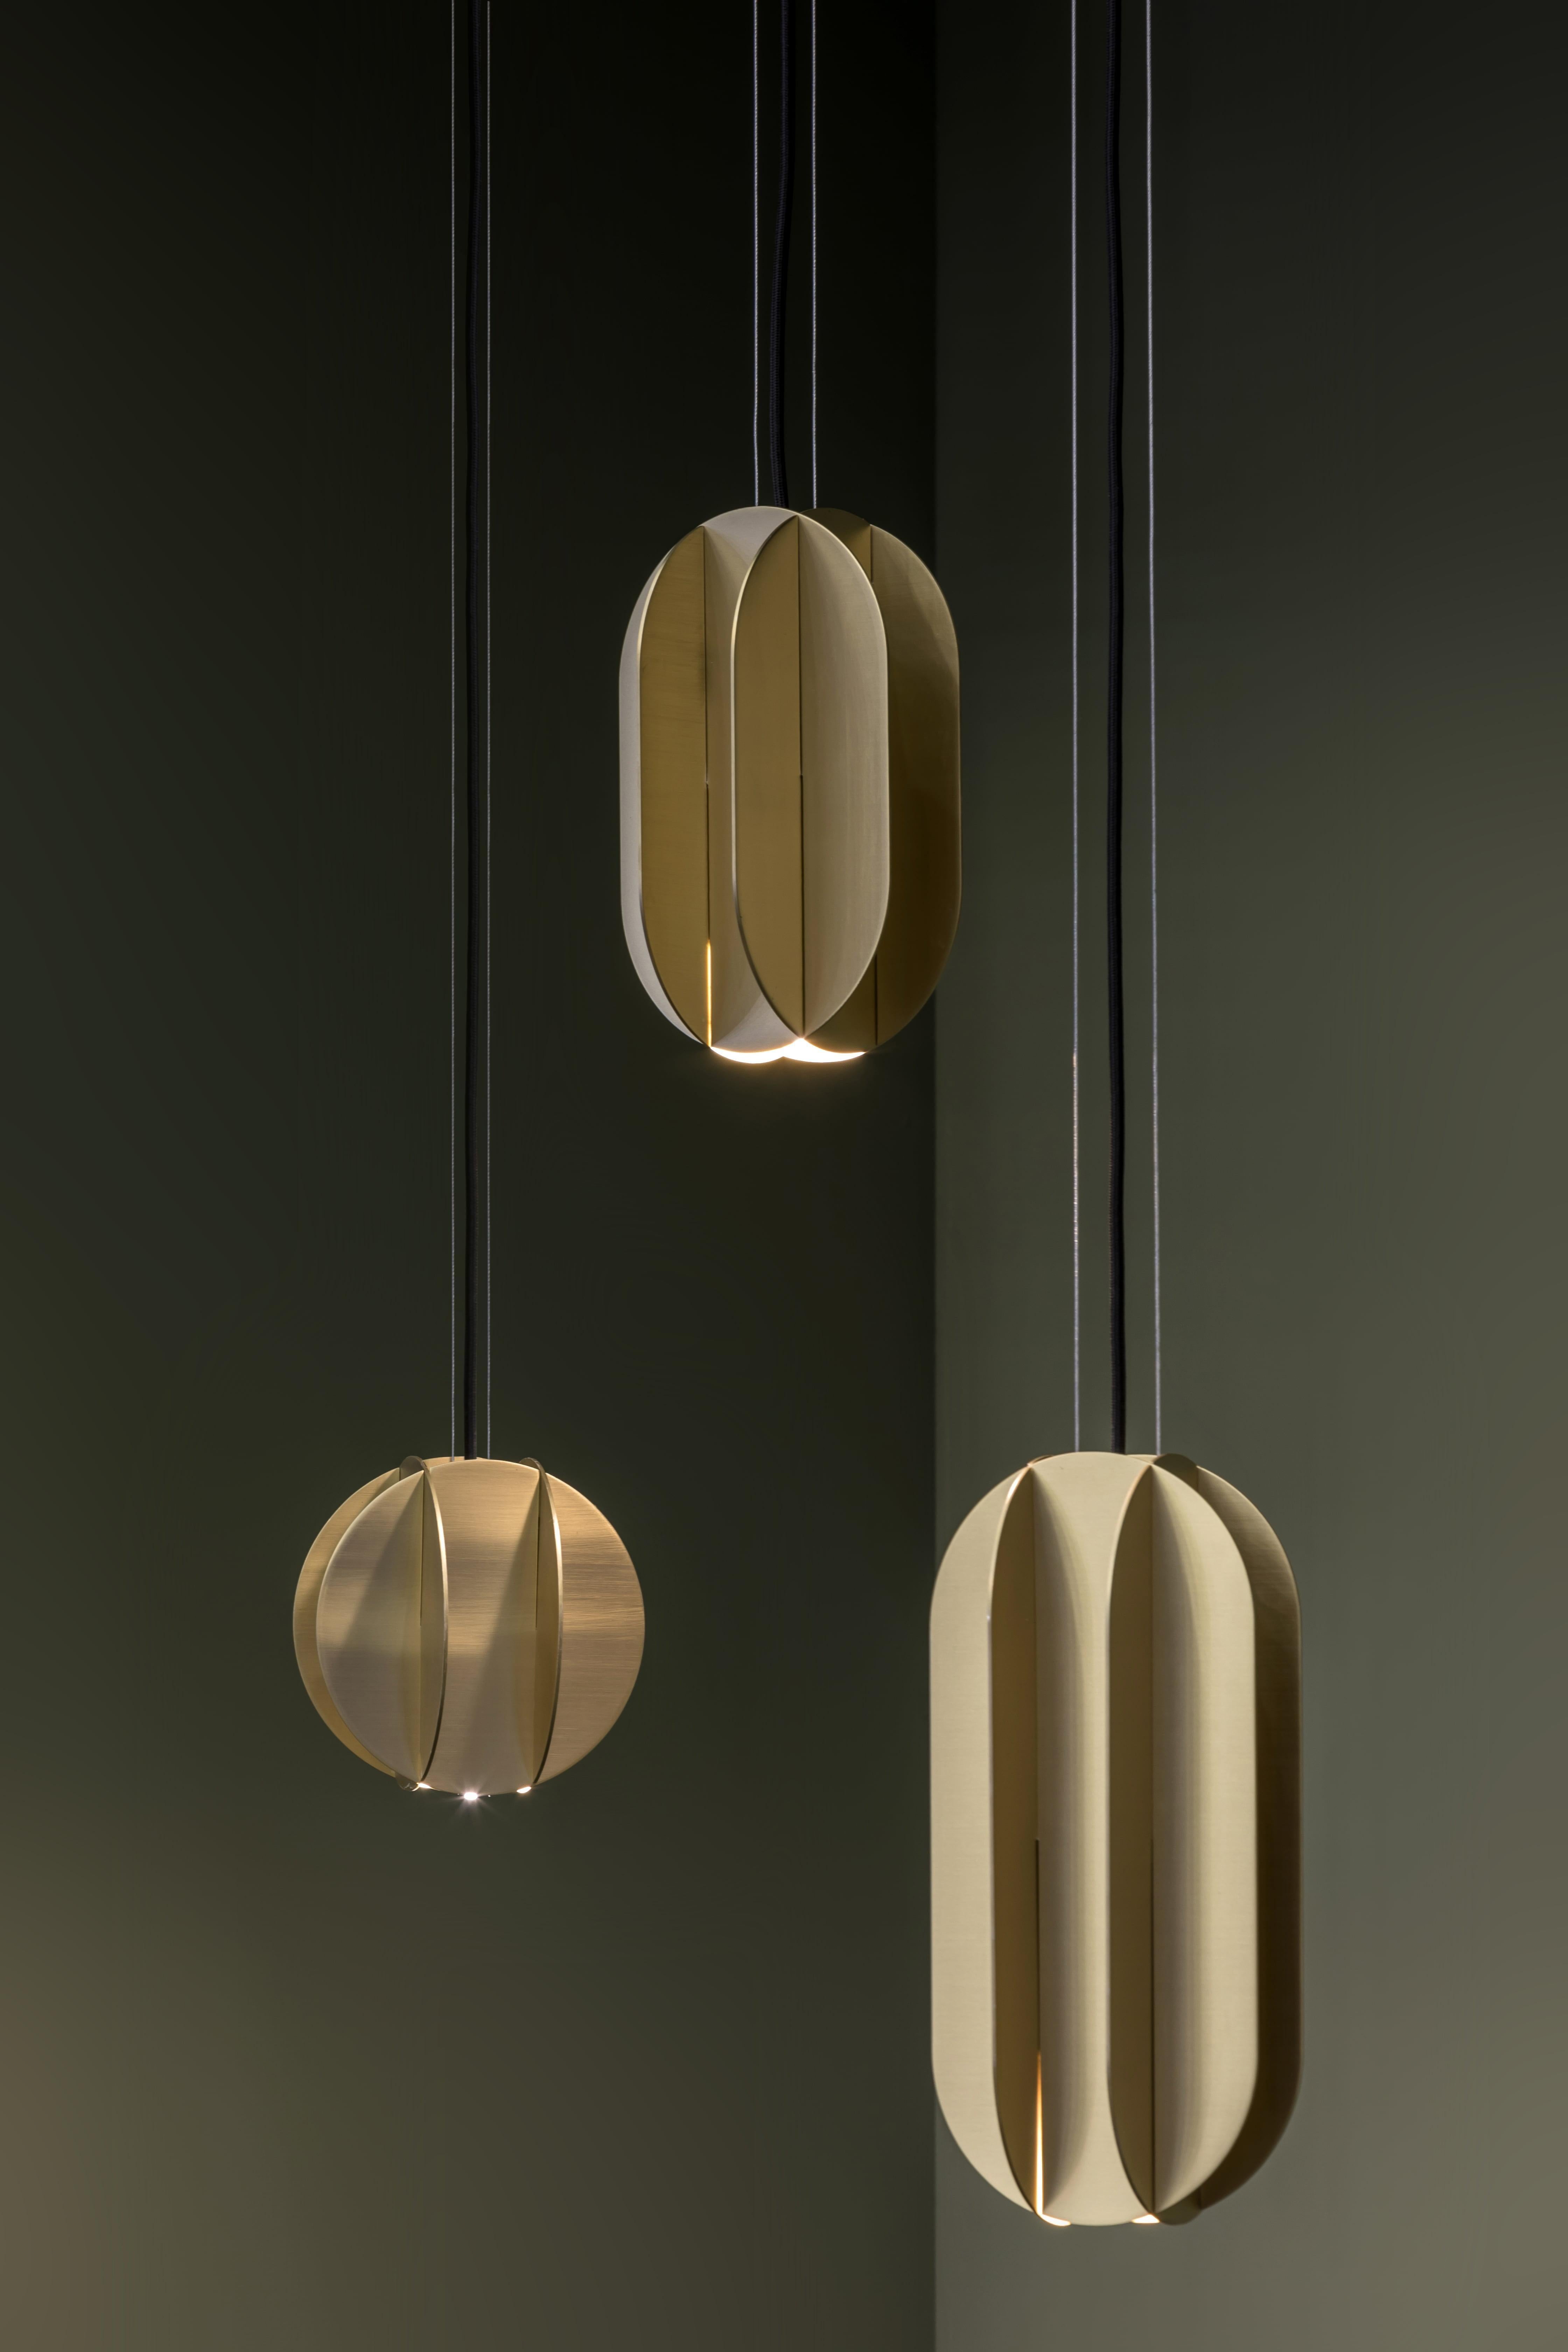 Brand: NOOM
Designer: Kateryna Sokolova
Materials: Brass
Dimensions of each lamp: H 15 cm x W 15 cm x D 15 cm
Net weight of each lamp: 1,5 kg
Electrification of each lamp: 2 × LED G9 10W.

EL collection of lighting is inspired by the geometric works